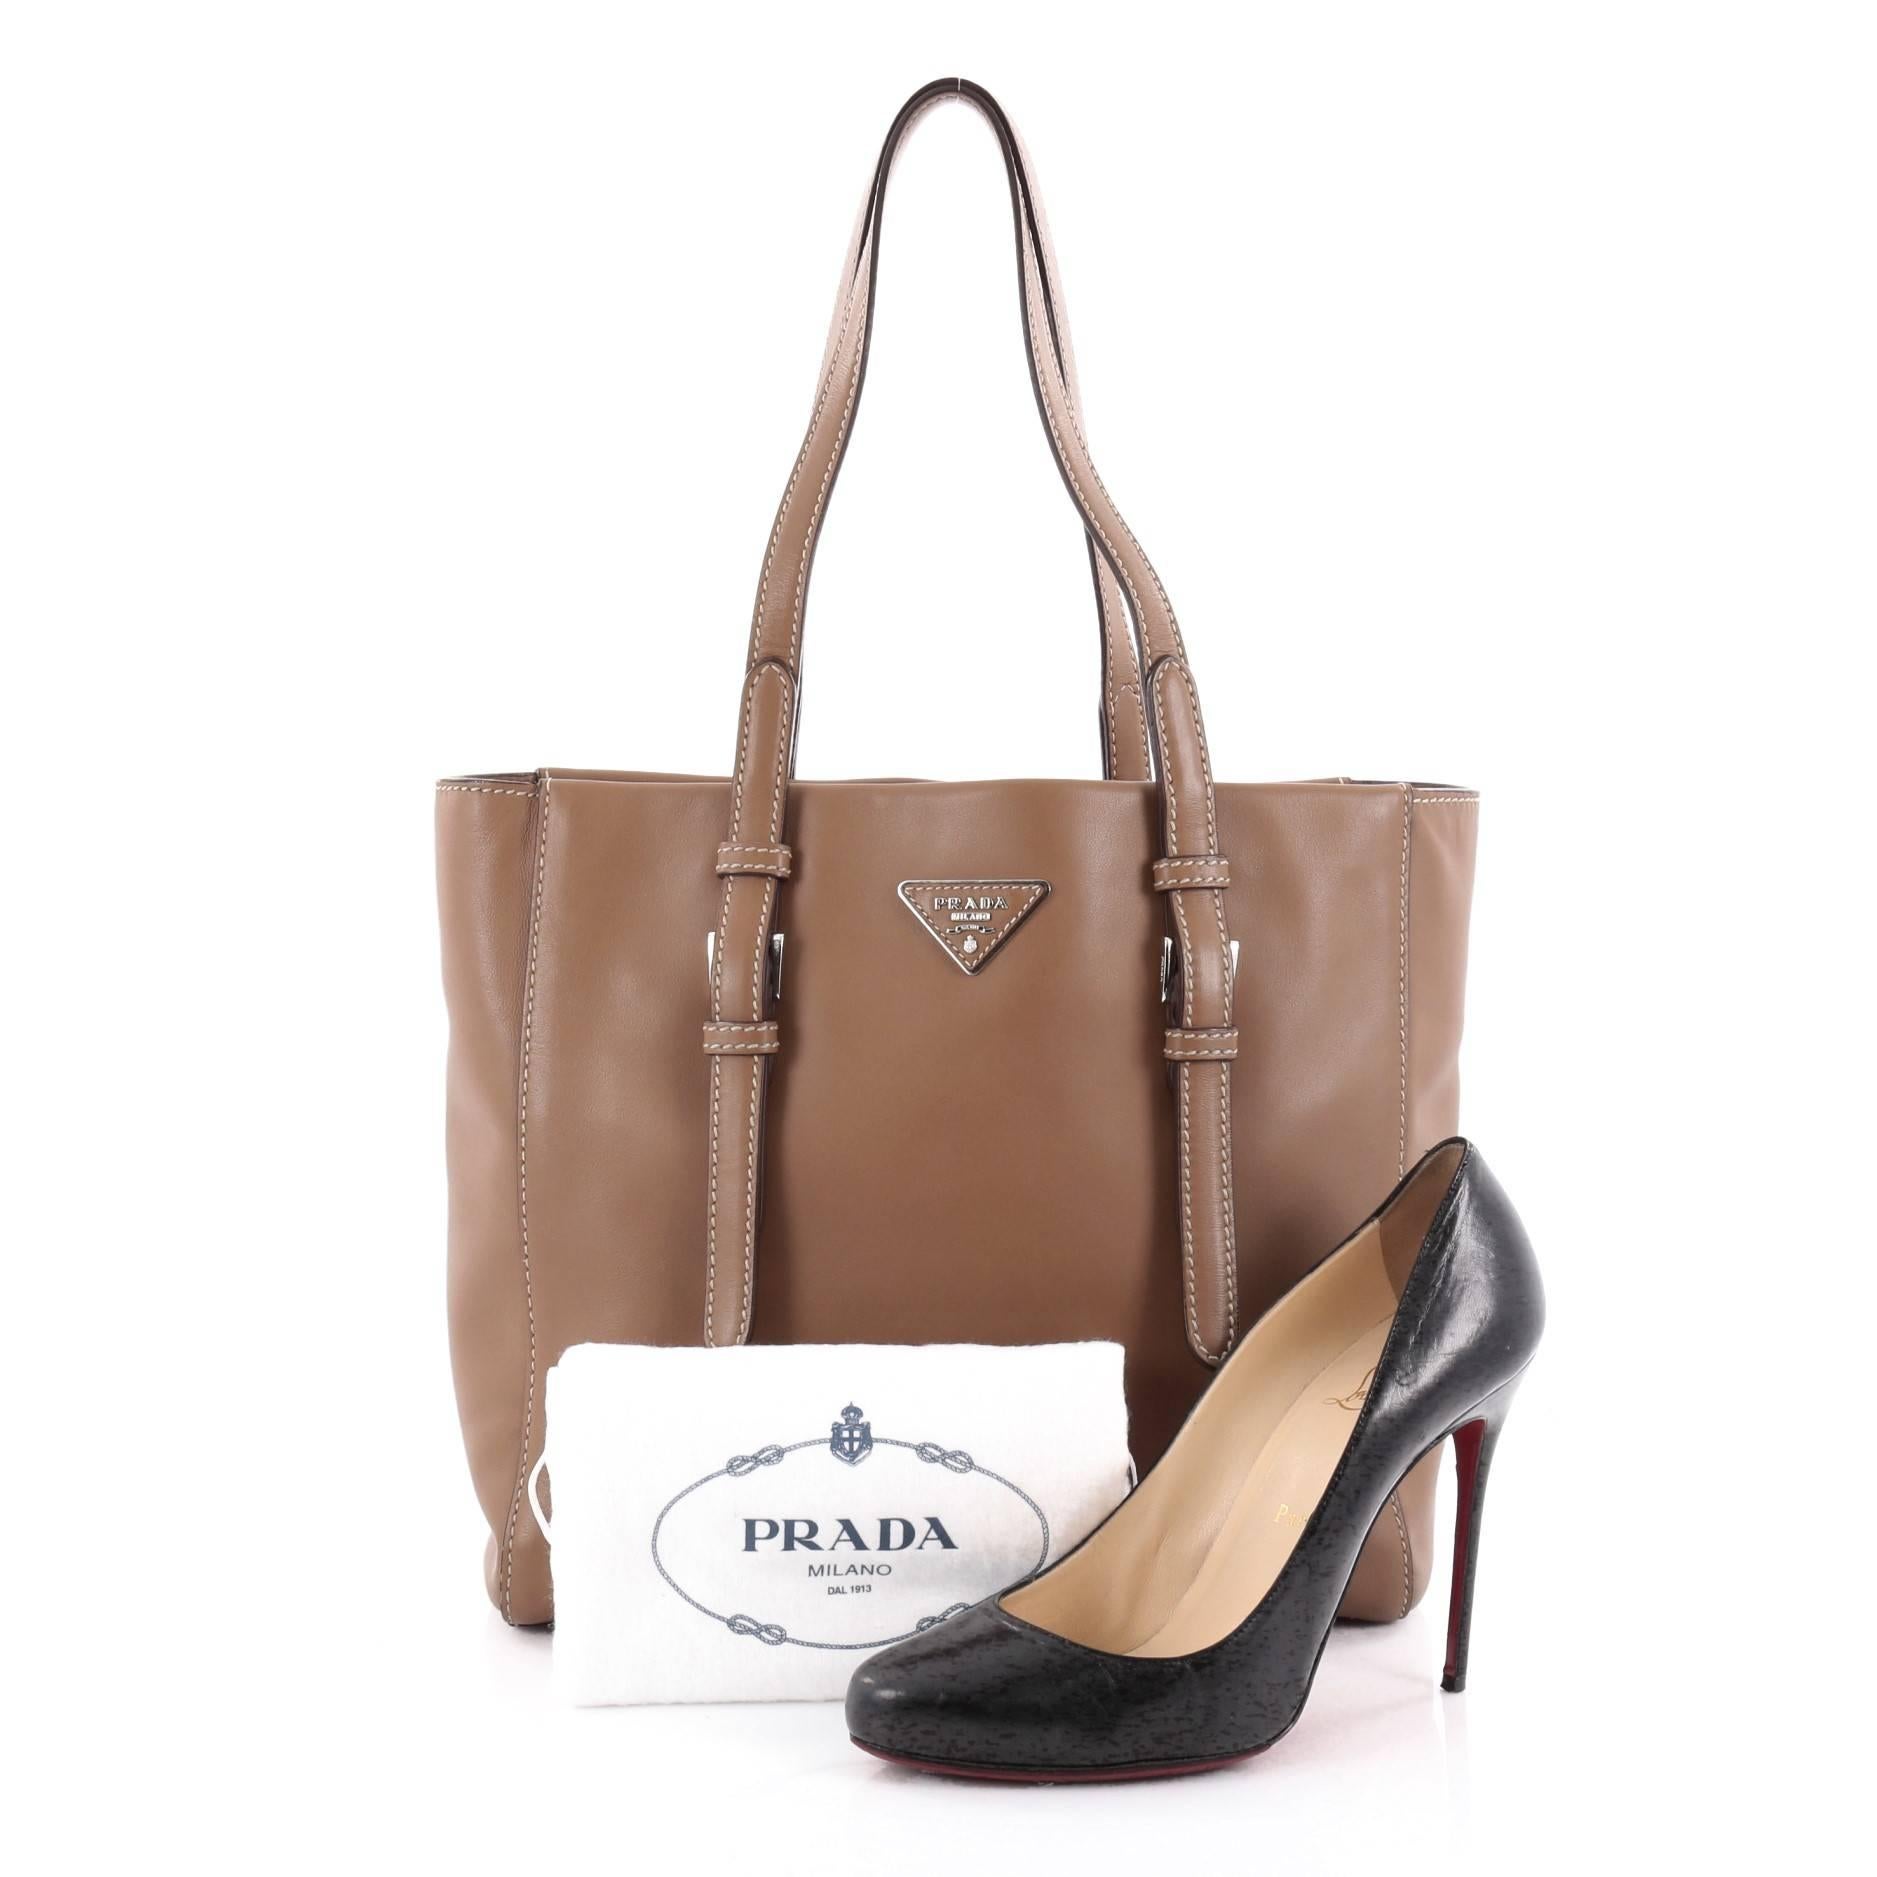 This authentic Prada Covered Strap Open Tote City Calfskin Medium is elegant in its simplicity and structure, a mark of Prada's fine craftsmanship. Crafted from sturdy brown calfskin leather, this tote features dual-flat leather handles with